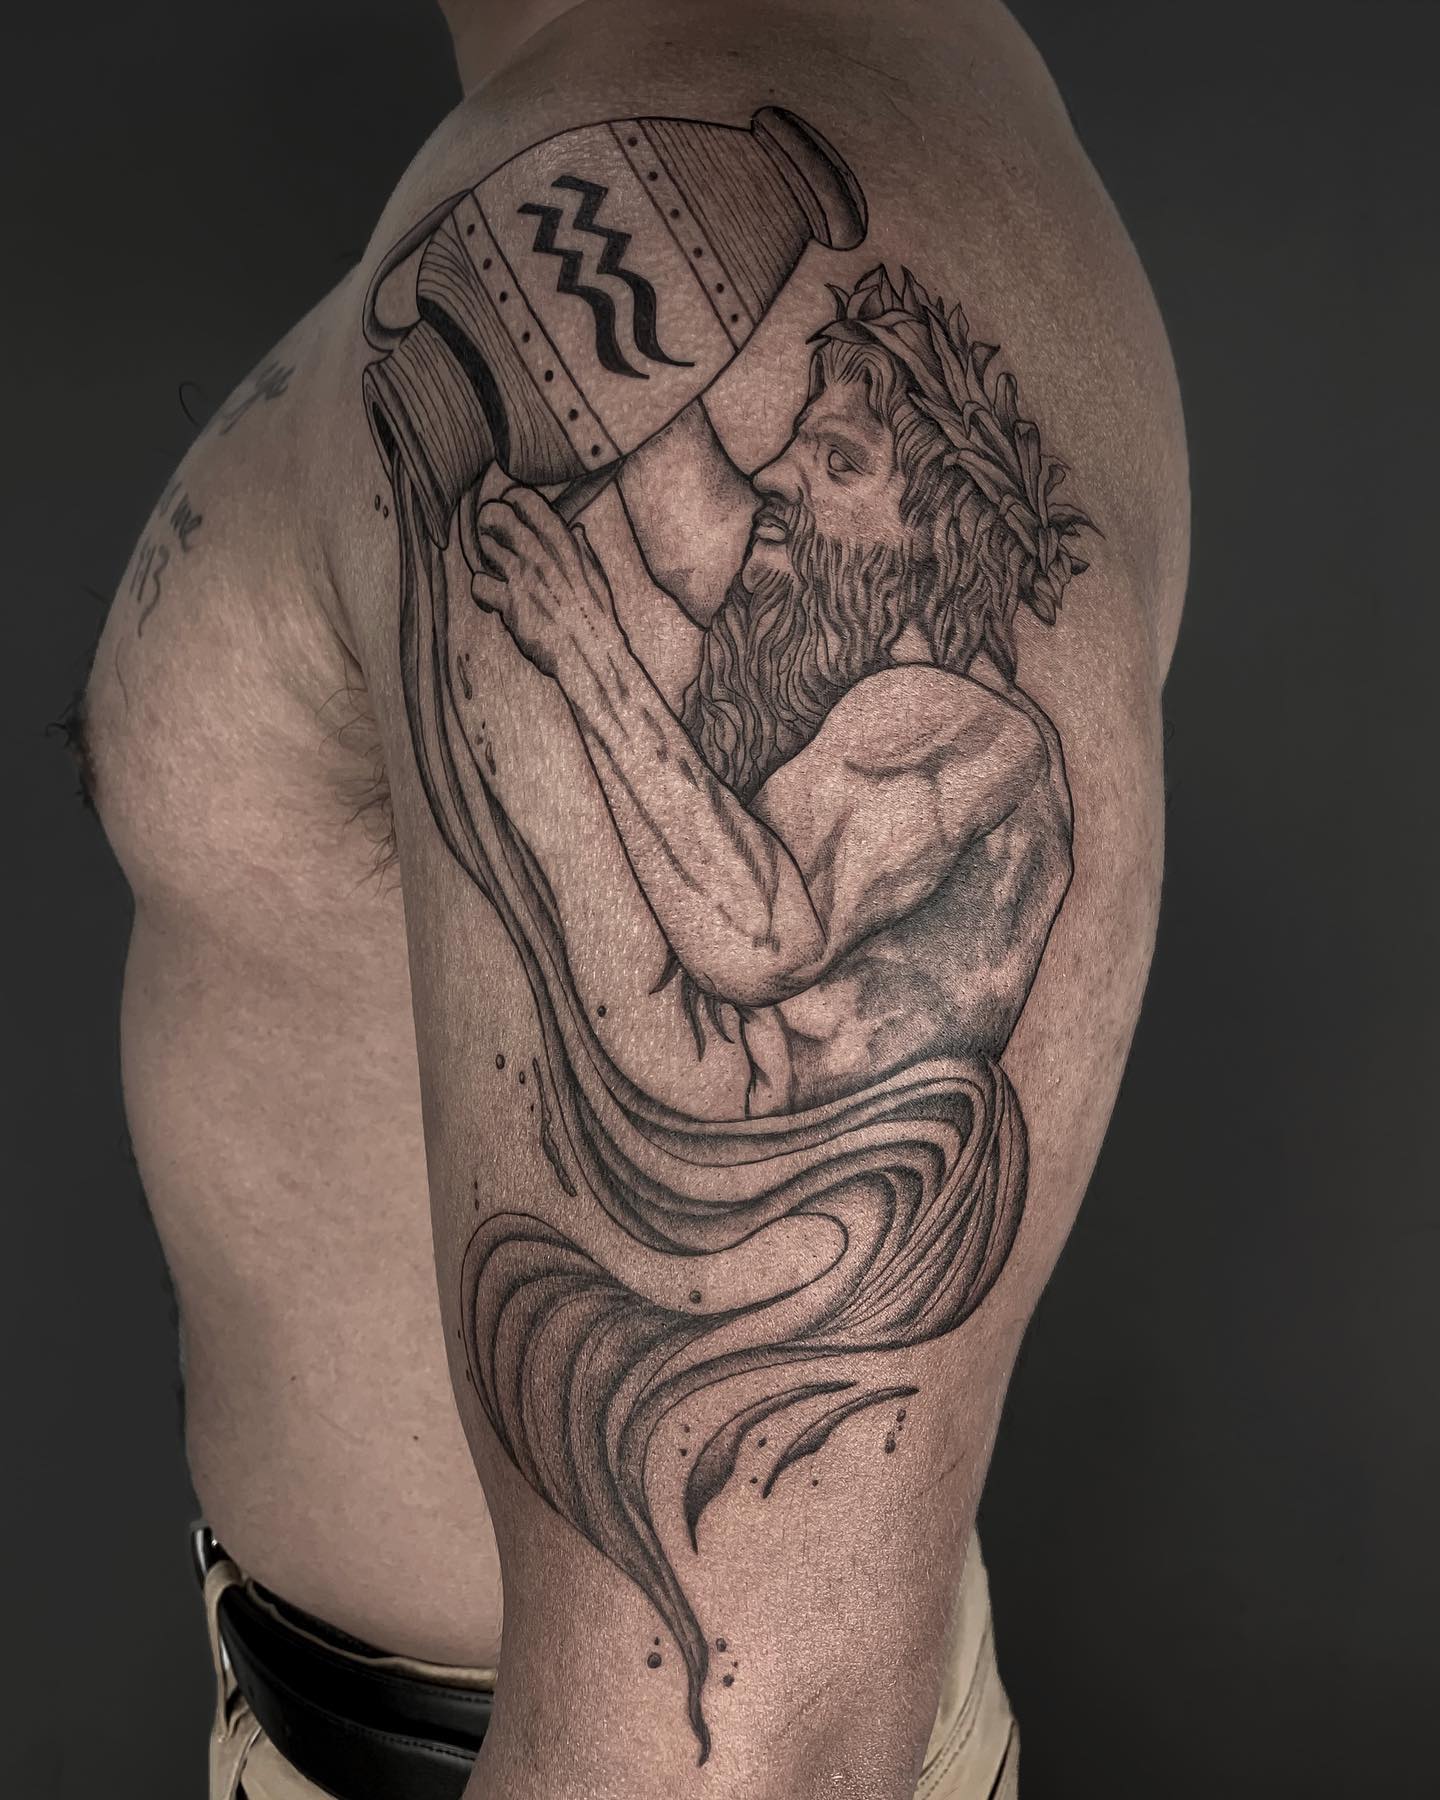 Aquarius guys will definitely love it! An ancient man, probably Greek, is carrying water to his people. Being a strong one, this man could symbolize the power of man who looks after his family. Why don't you try this out? But first, you need to find a talented tattoo artist.